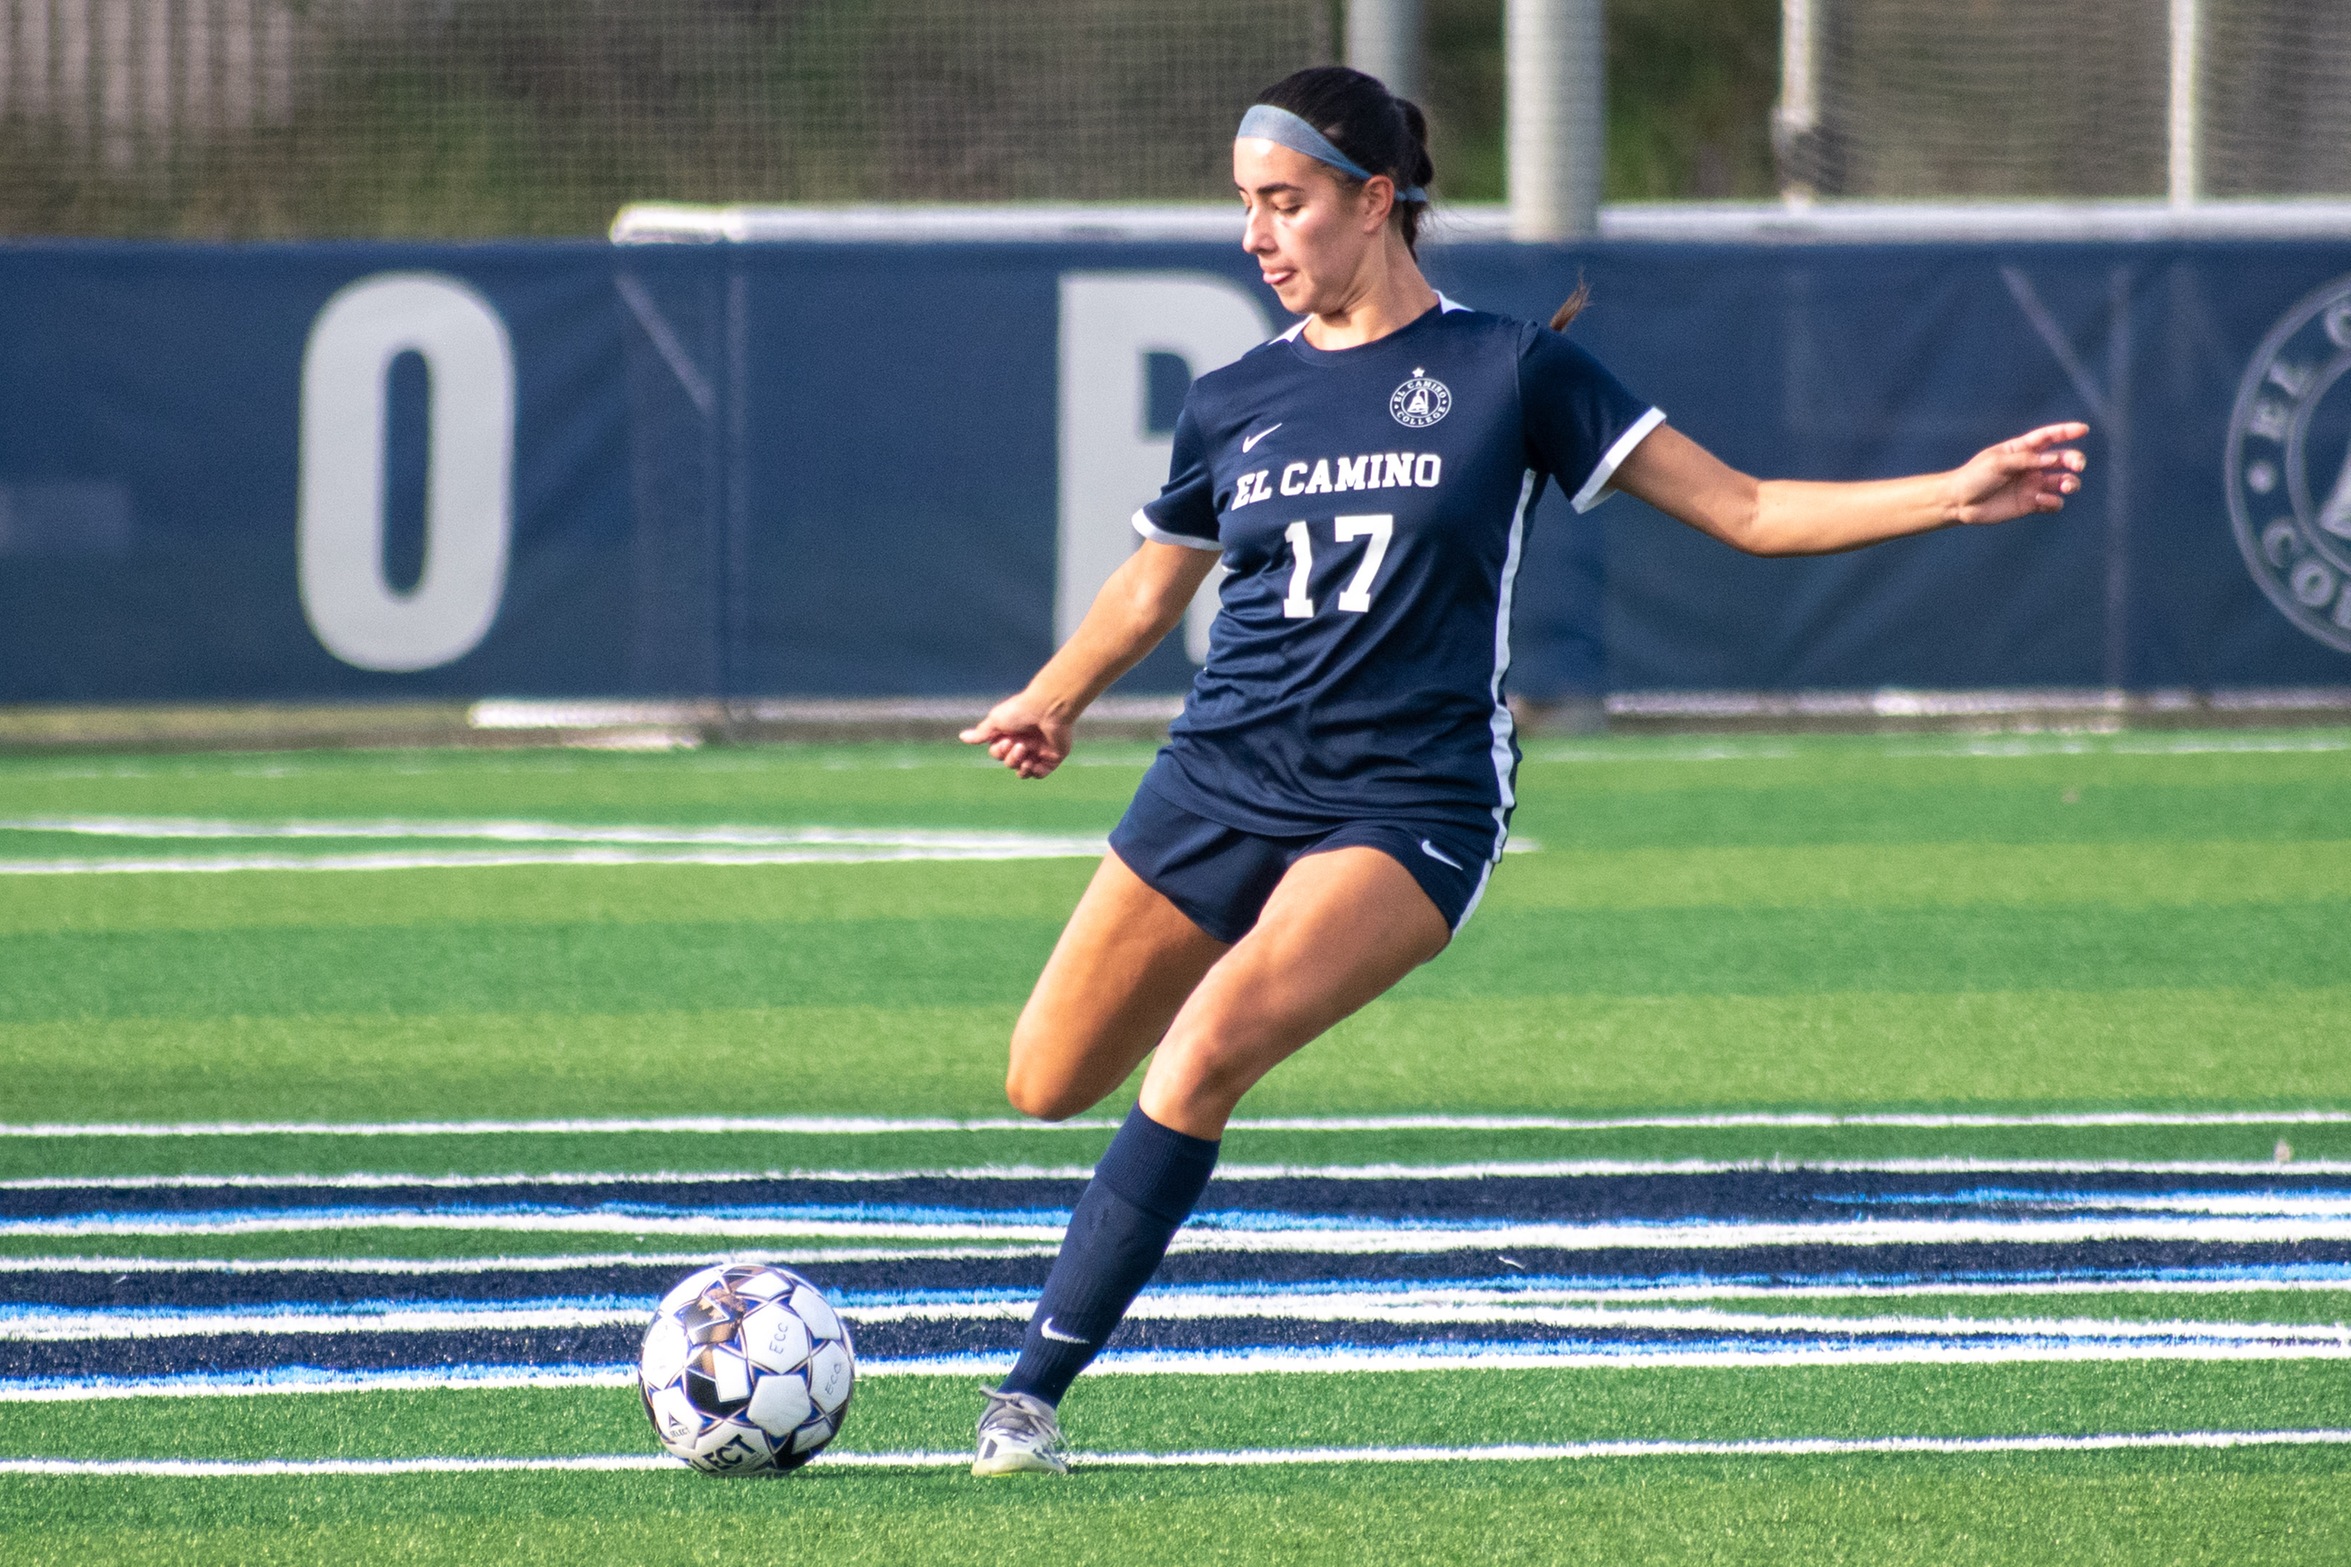 Women’s Soccer Ranked 17th In Latest National Poll